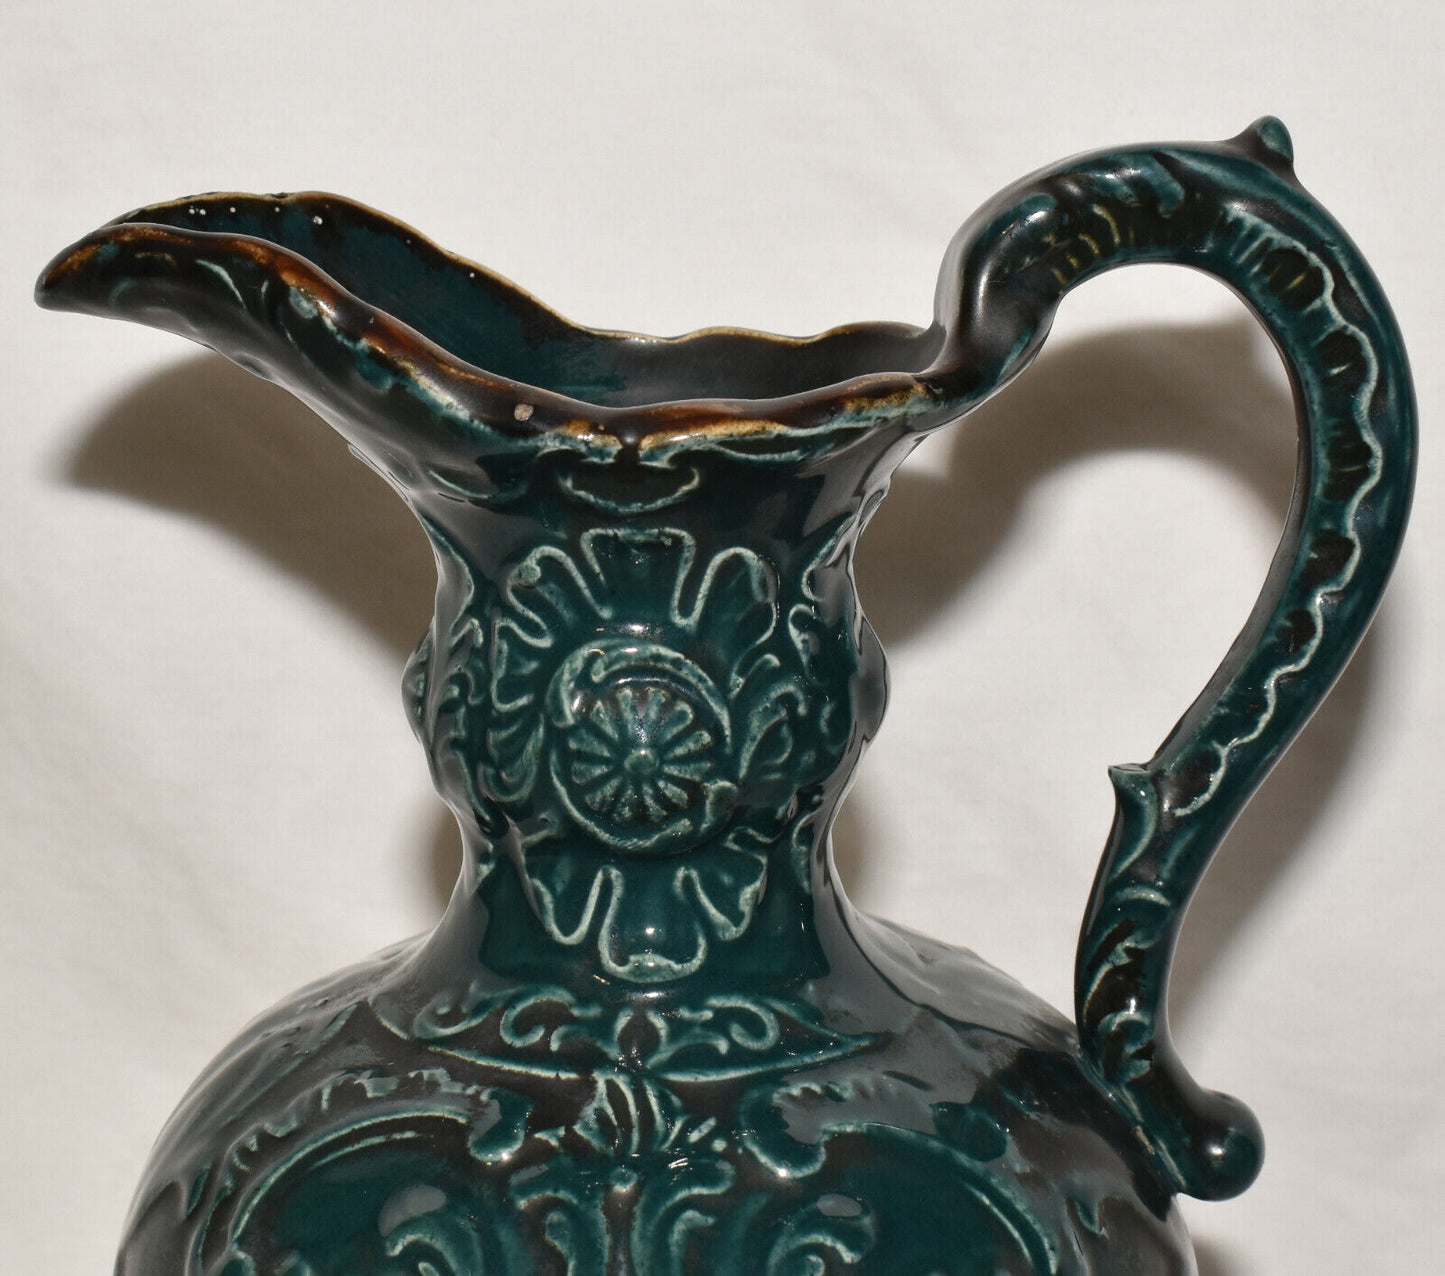 Antique Hand Painted Porcelain Ewer Pitcher 11" Ewer Floral Motif in High Relief